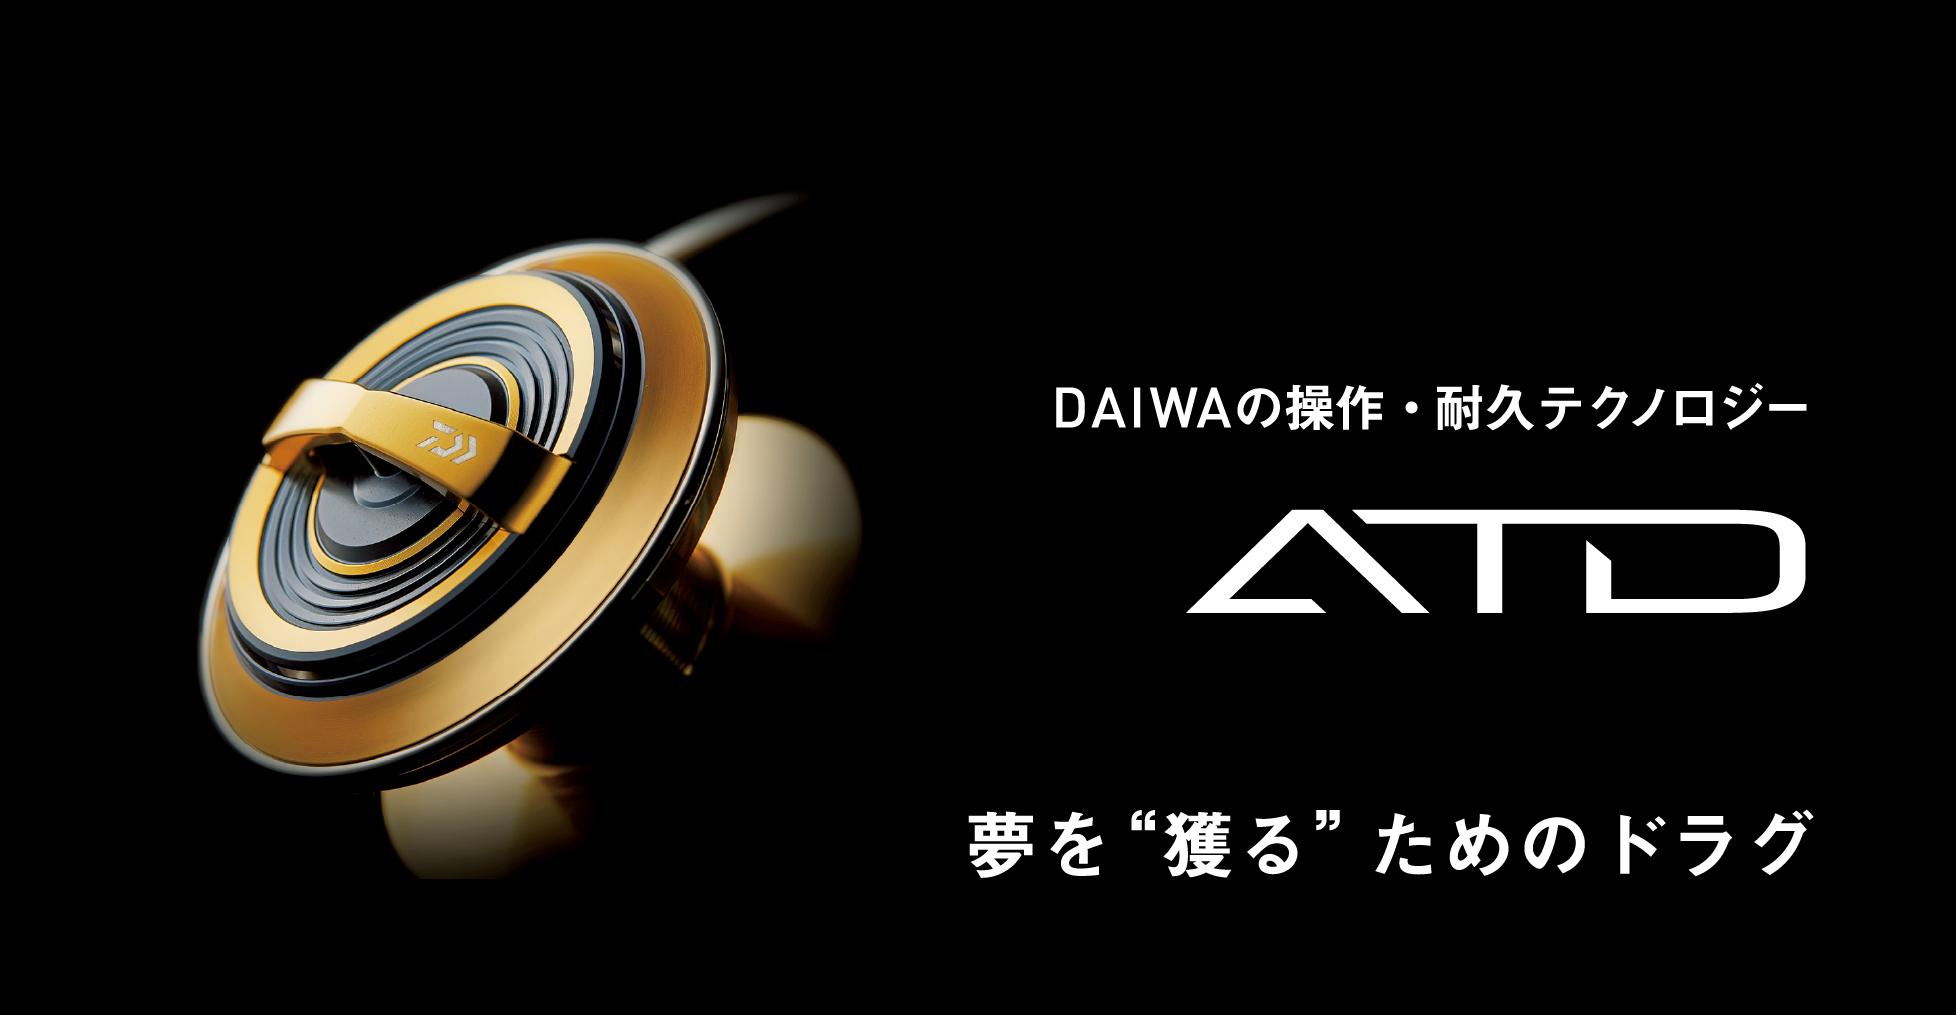 DAIWA genuine] ATD Drag Washer for All the Spinning Reel Models